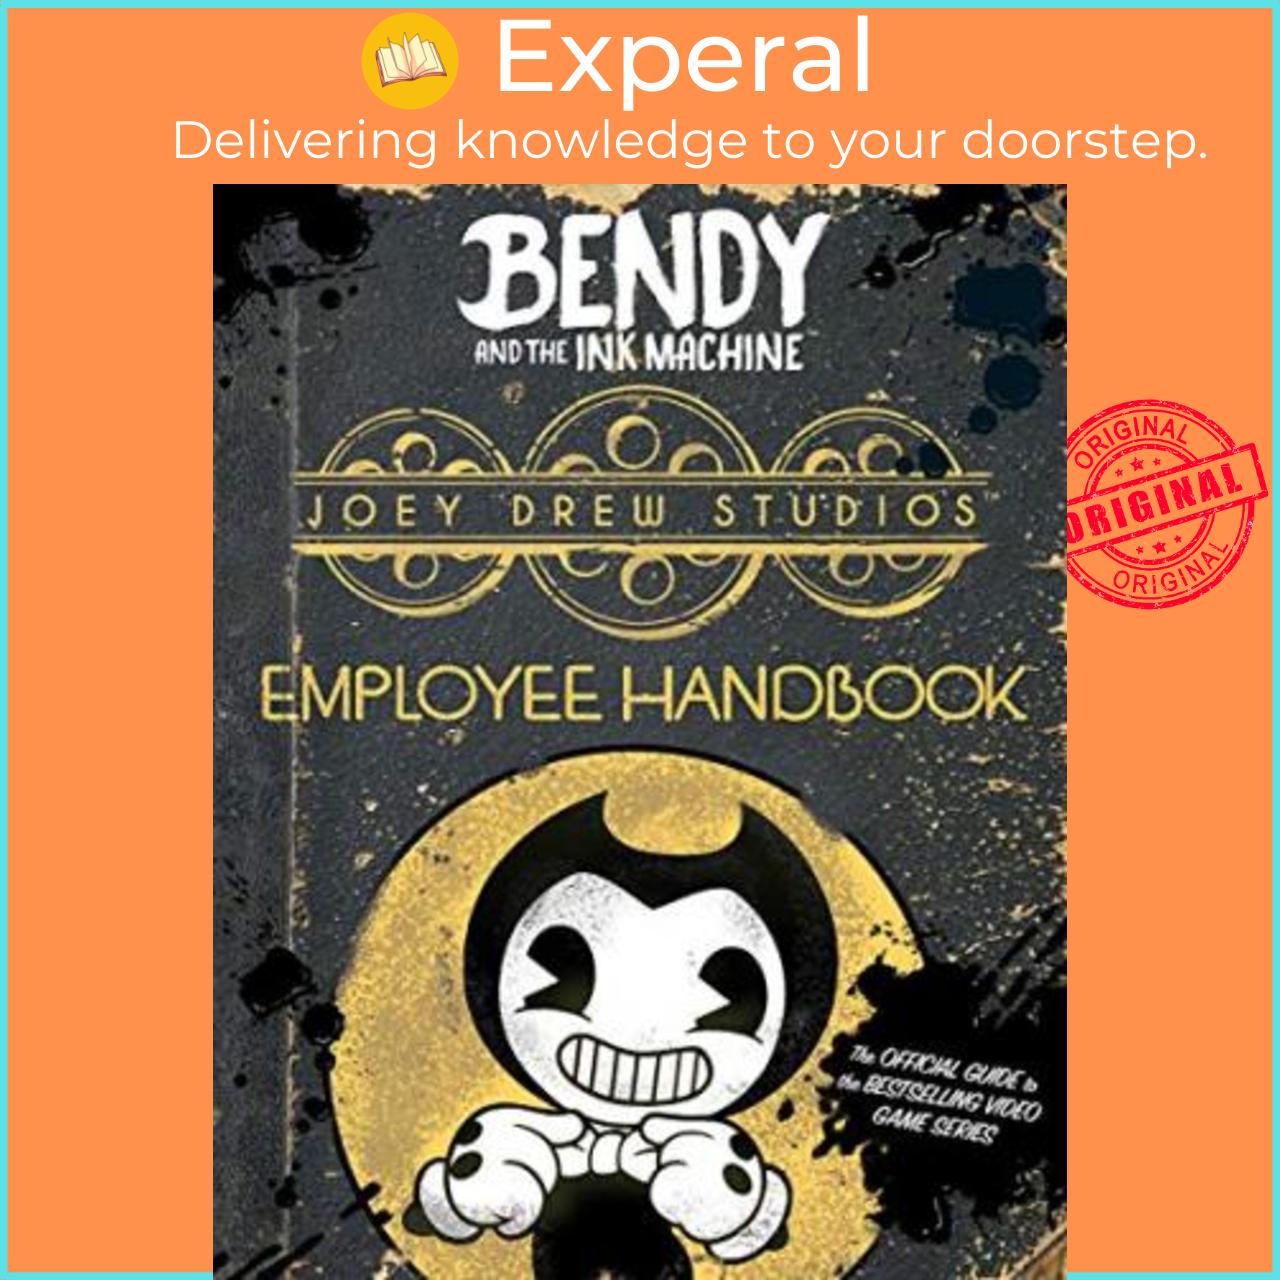 Sách - Joey Drew Studios Employee Handbook (Bendy and the Ink Machine) by Scholastic (US edition, paperback)